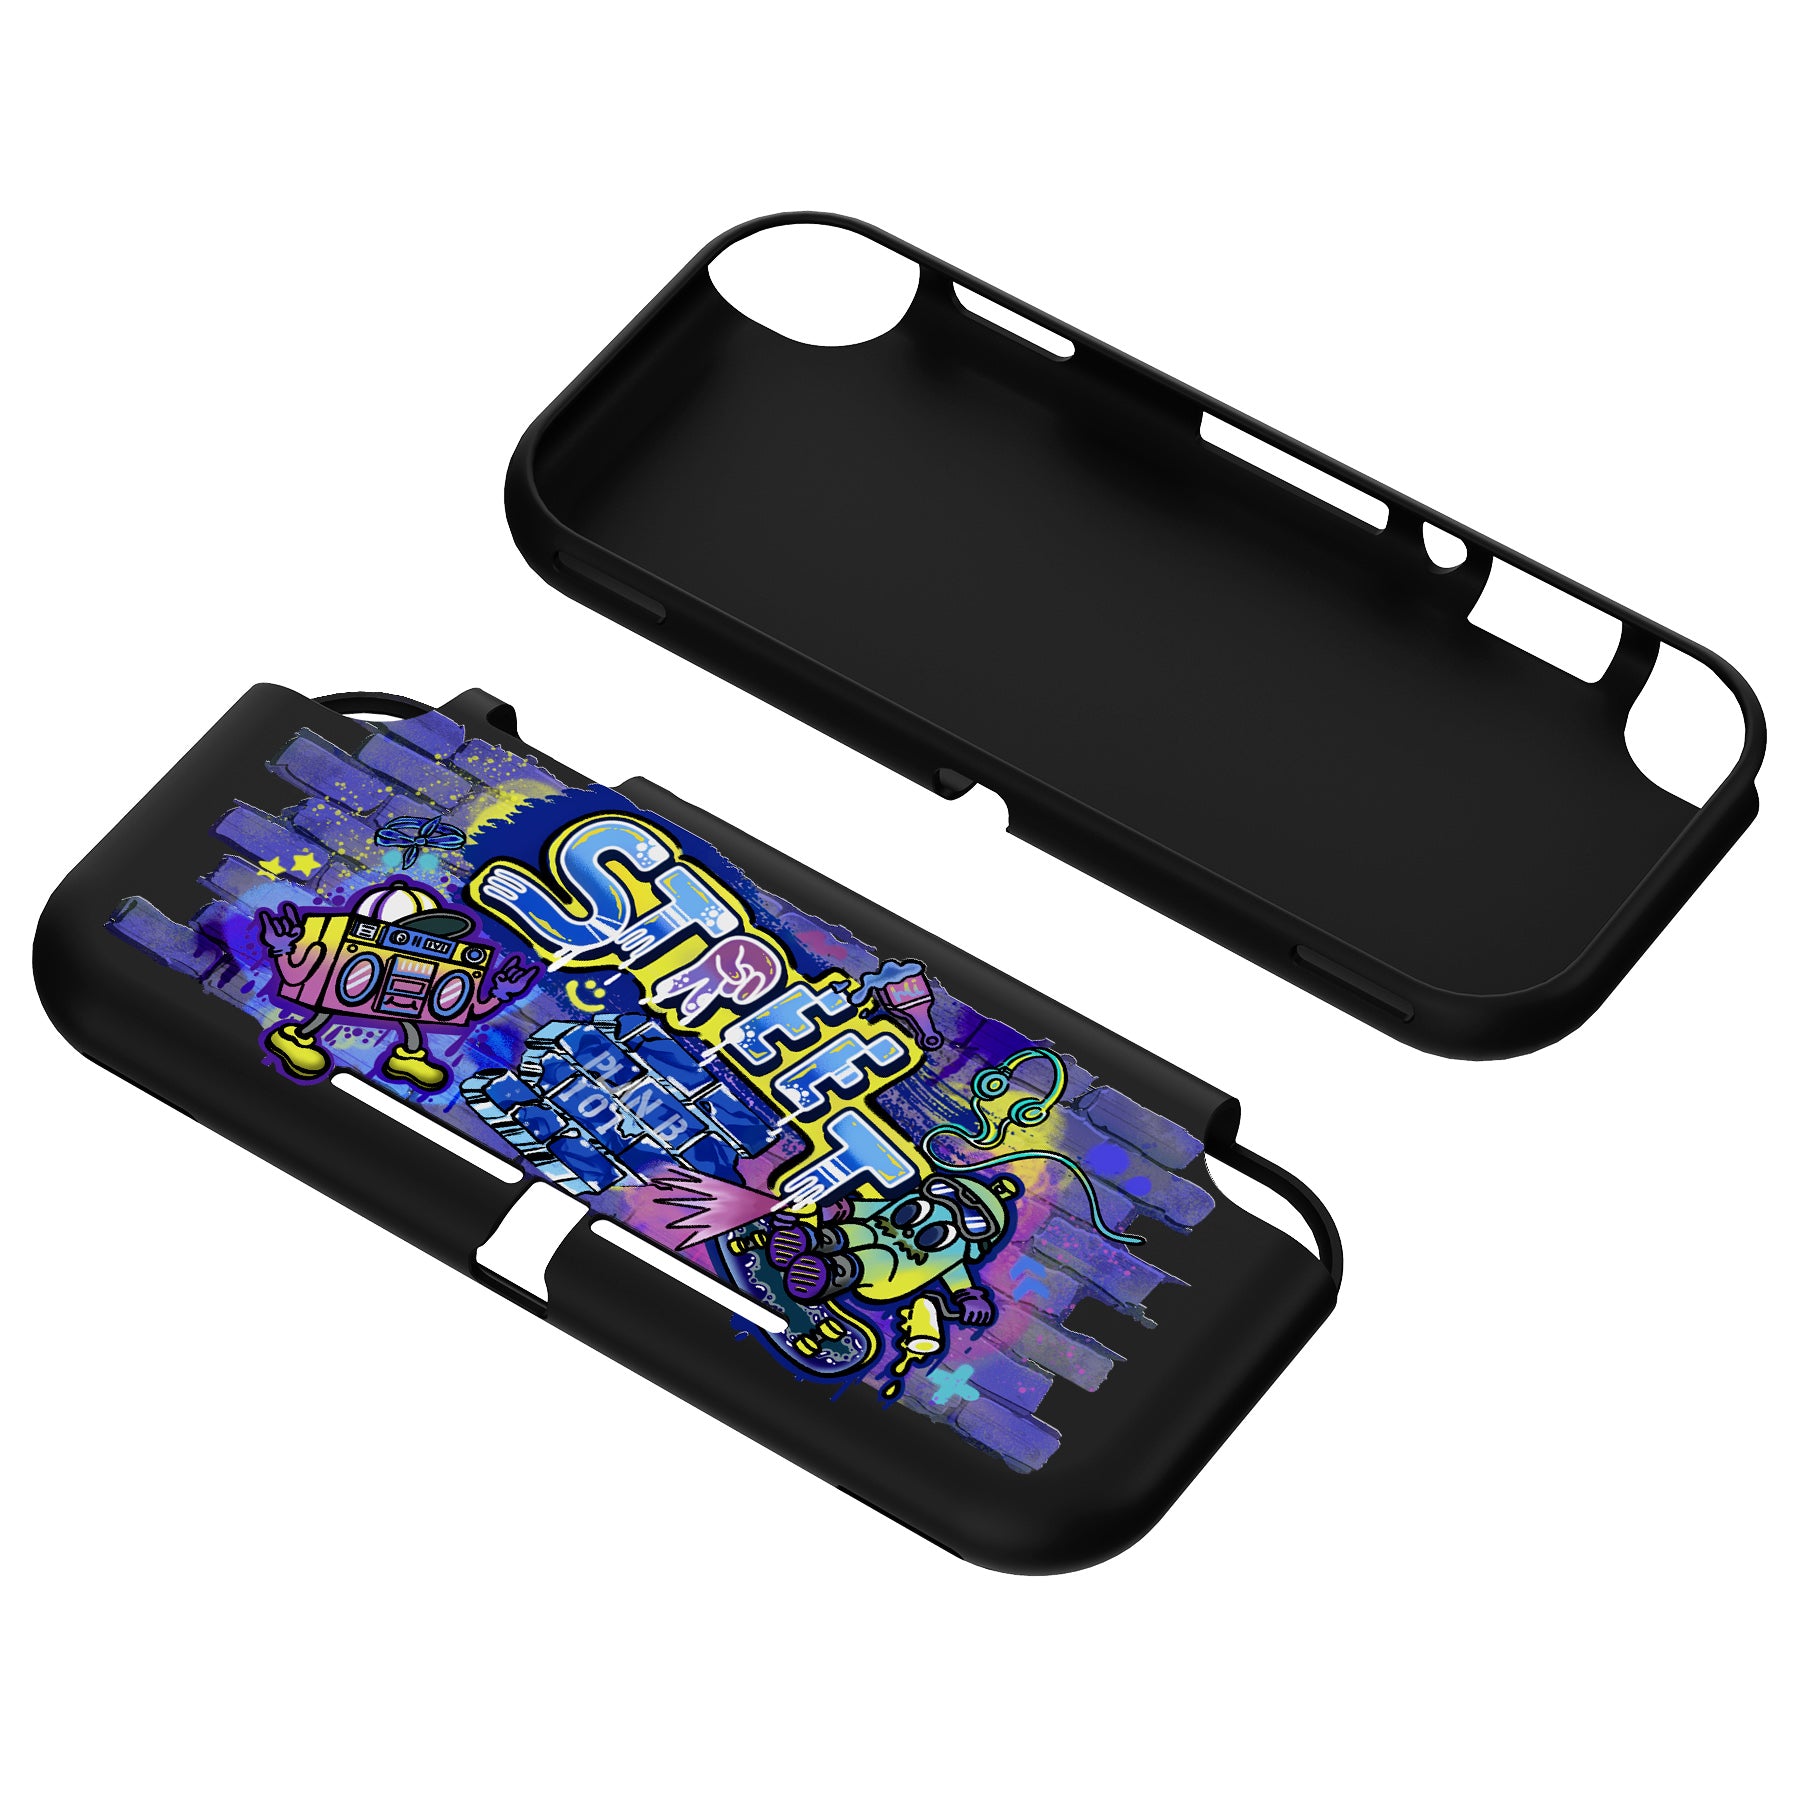 PlayVital Street Art Custom Protective Case for NS Switch Lite, Soft TPU Slim Case Cover for NS Switch Lite - LTU6026 PlayVital